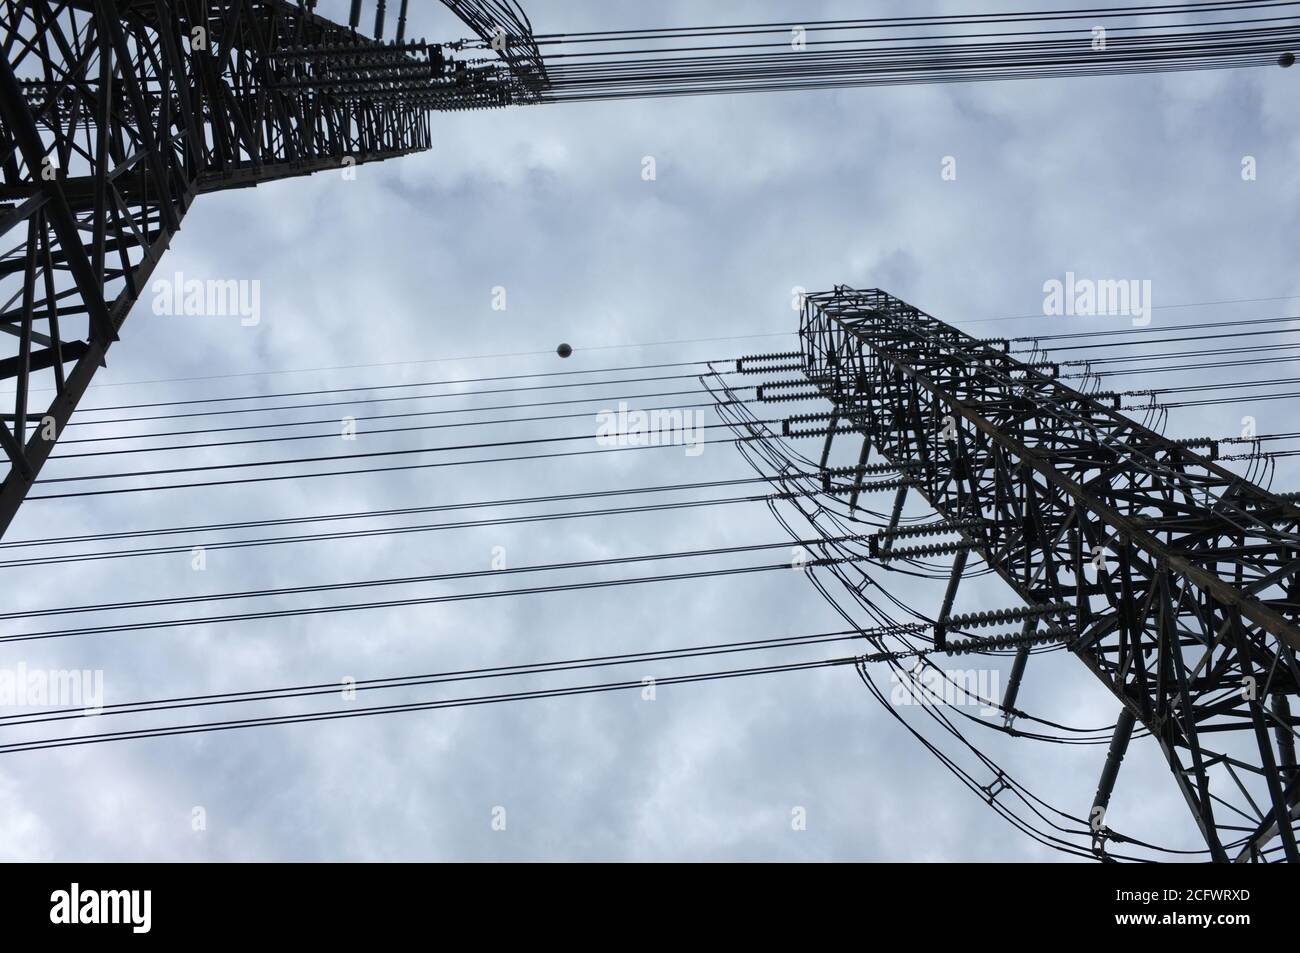 Close up view , high voltage power lines station. High voltage electric transmission pylon silhouetted tower. Stock Photo